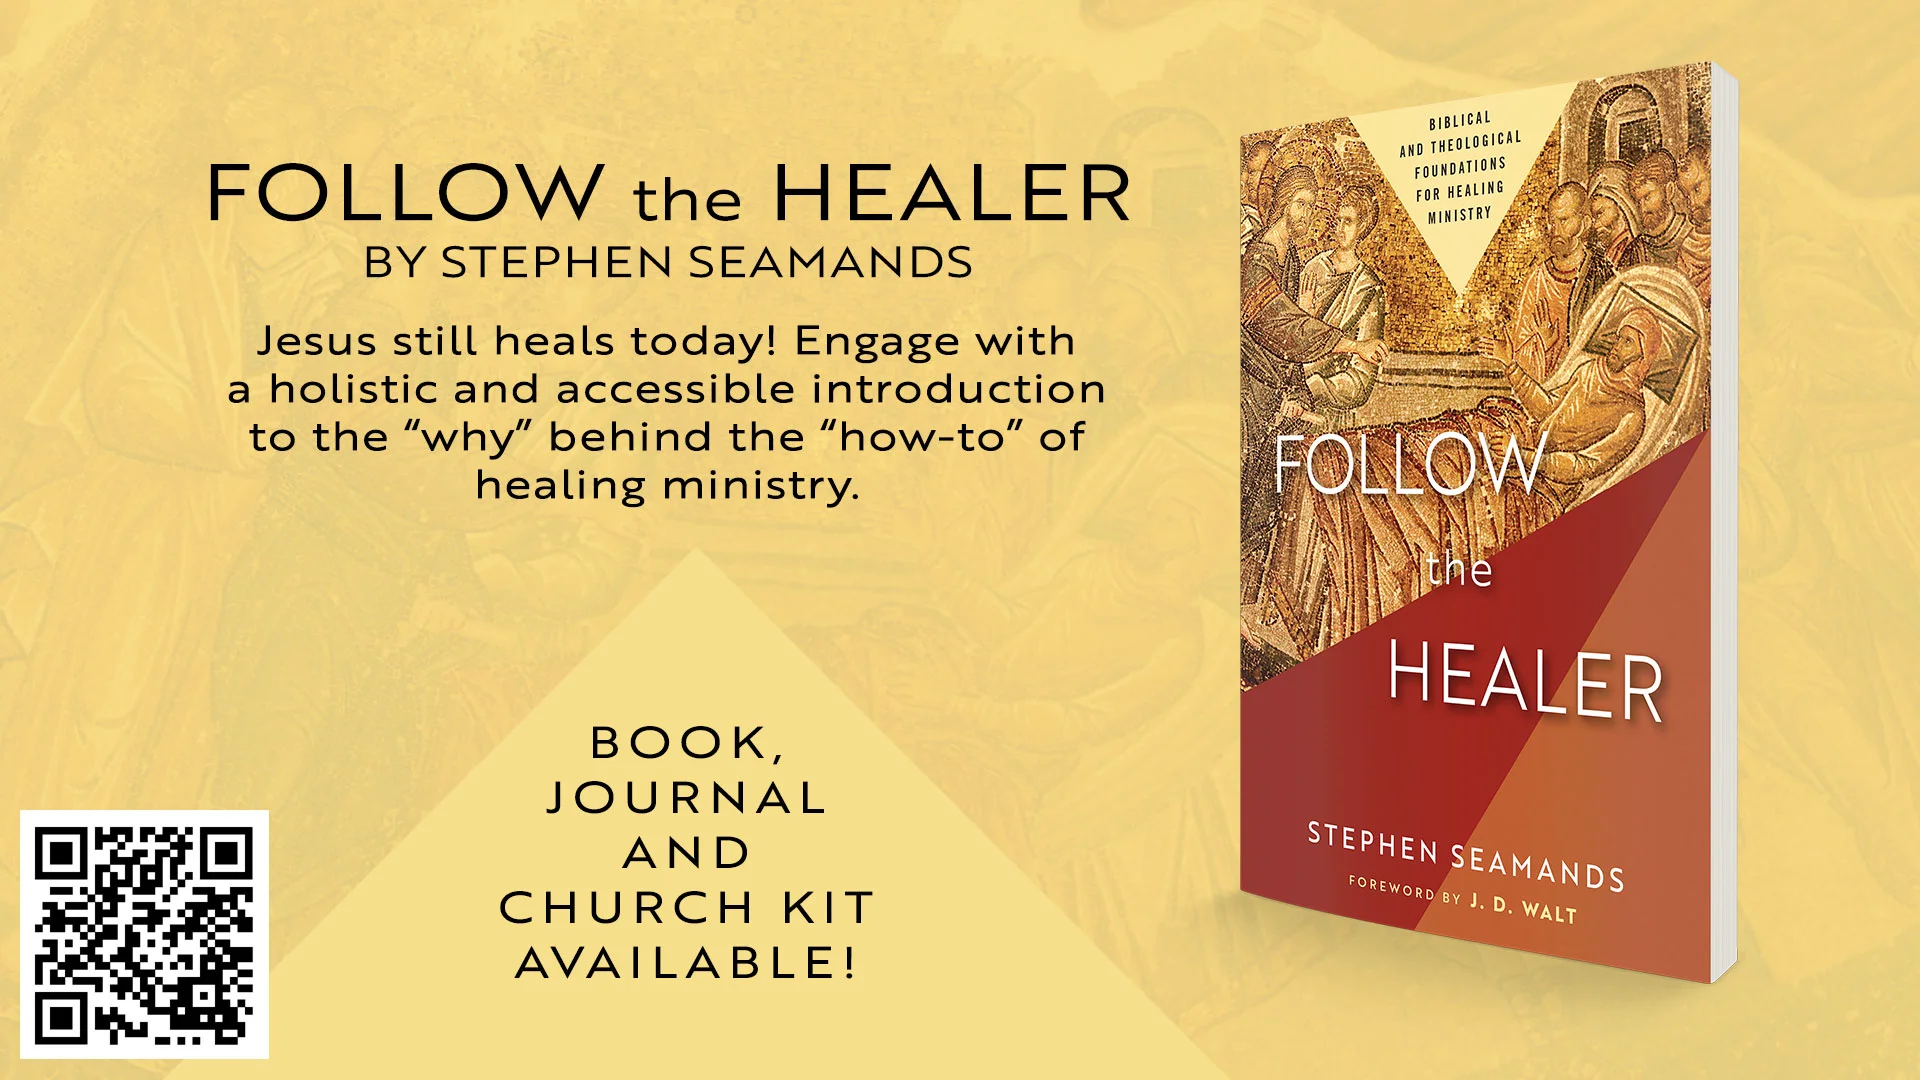 Follow the Healer Interview with Stephen Seamands and JD Walt on Vimeo